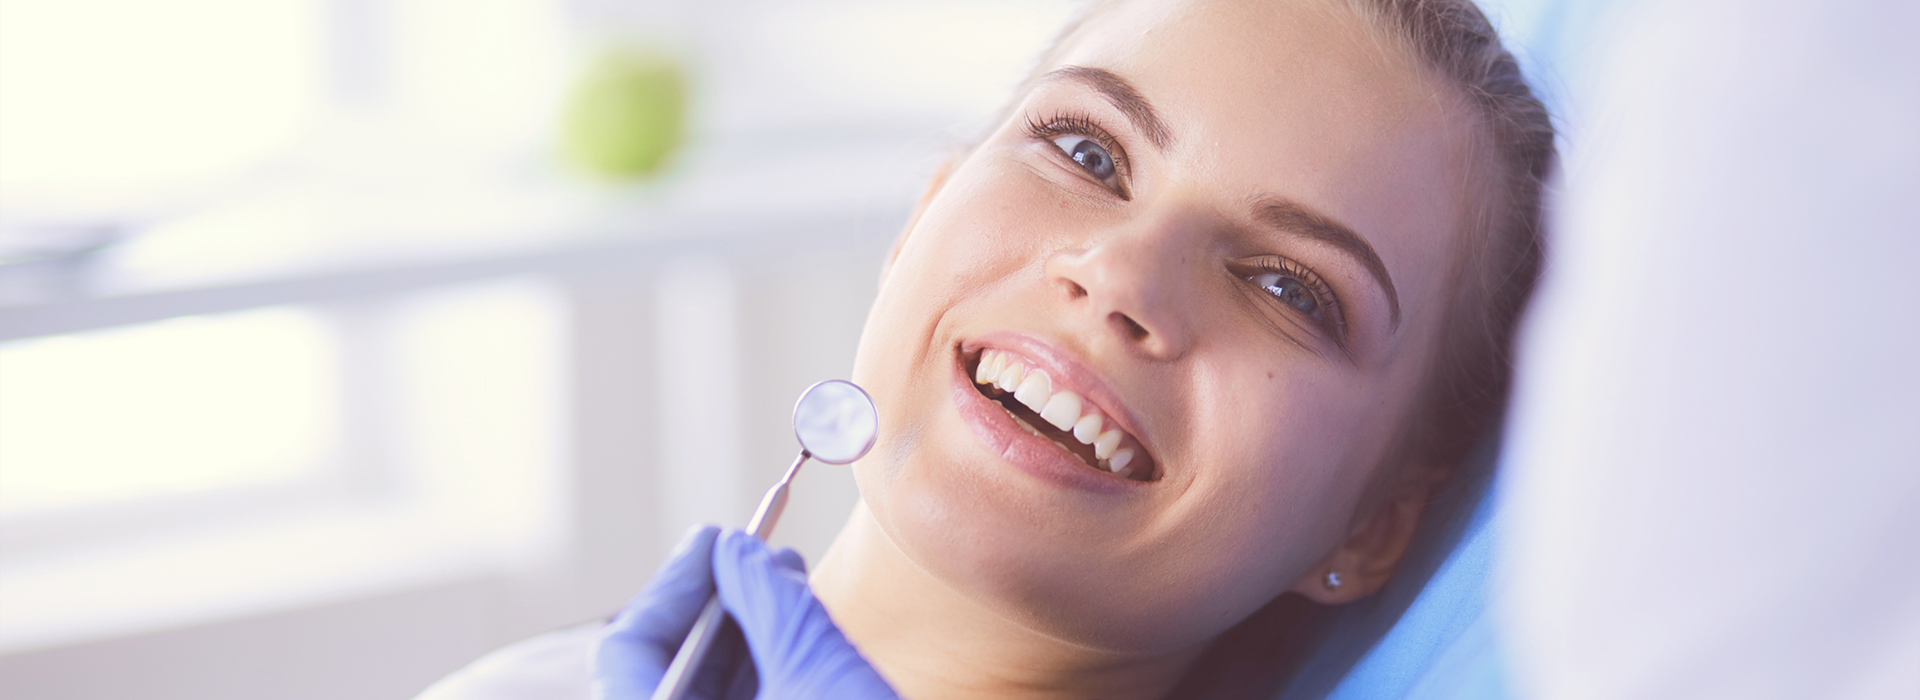 Plainfield Dental Care | Dentures, TMJ Treatment and Root Canal Treatment